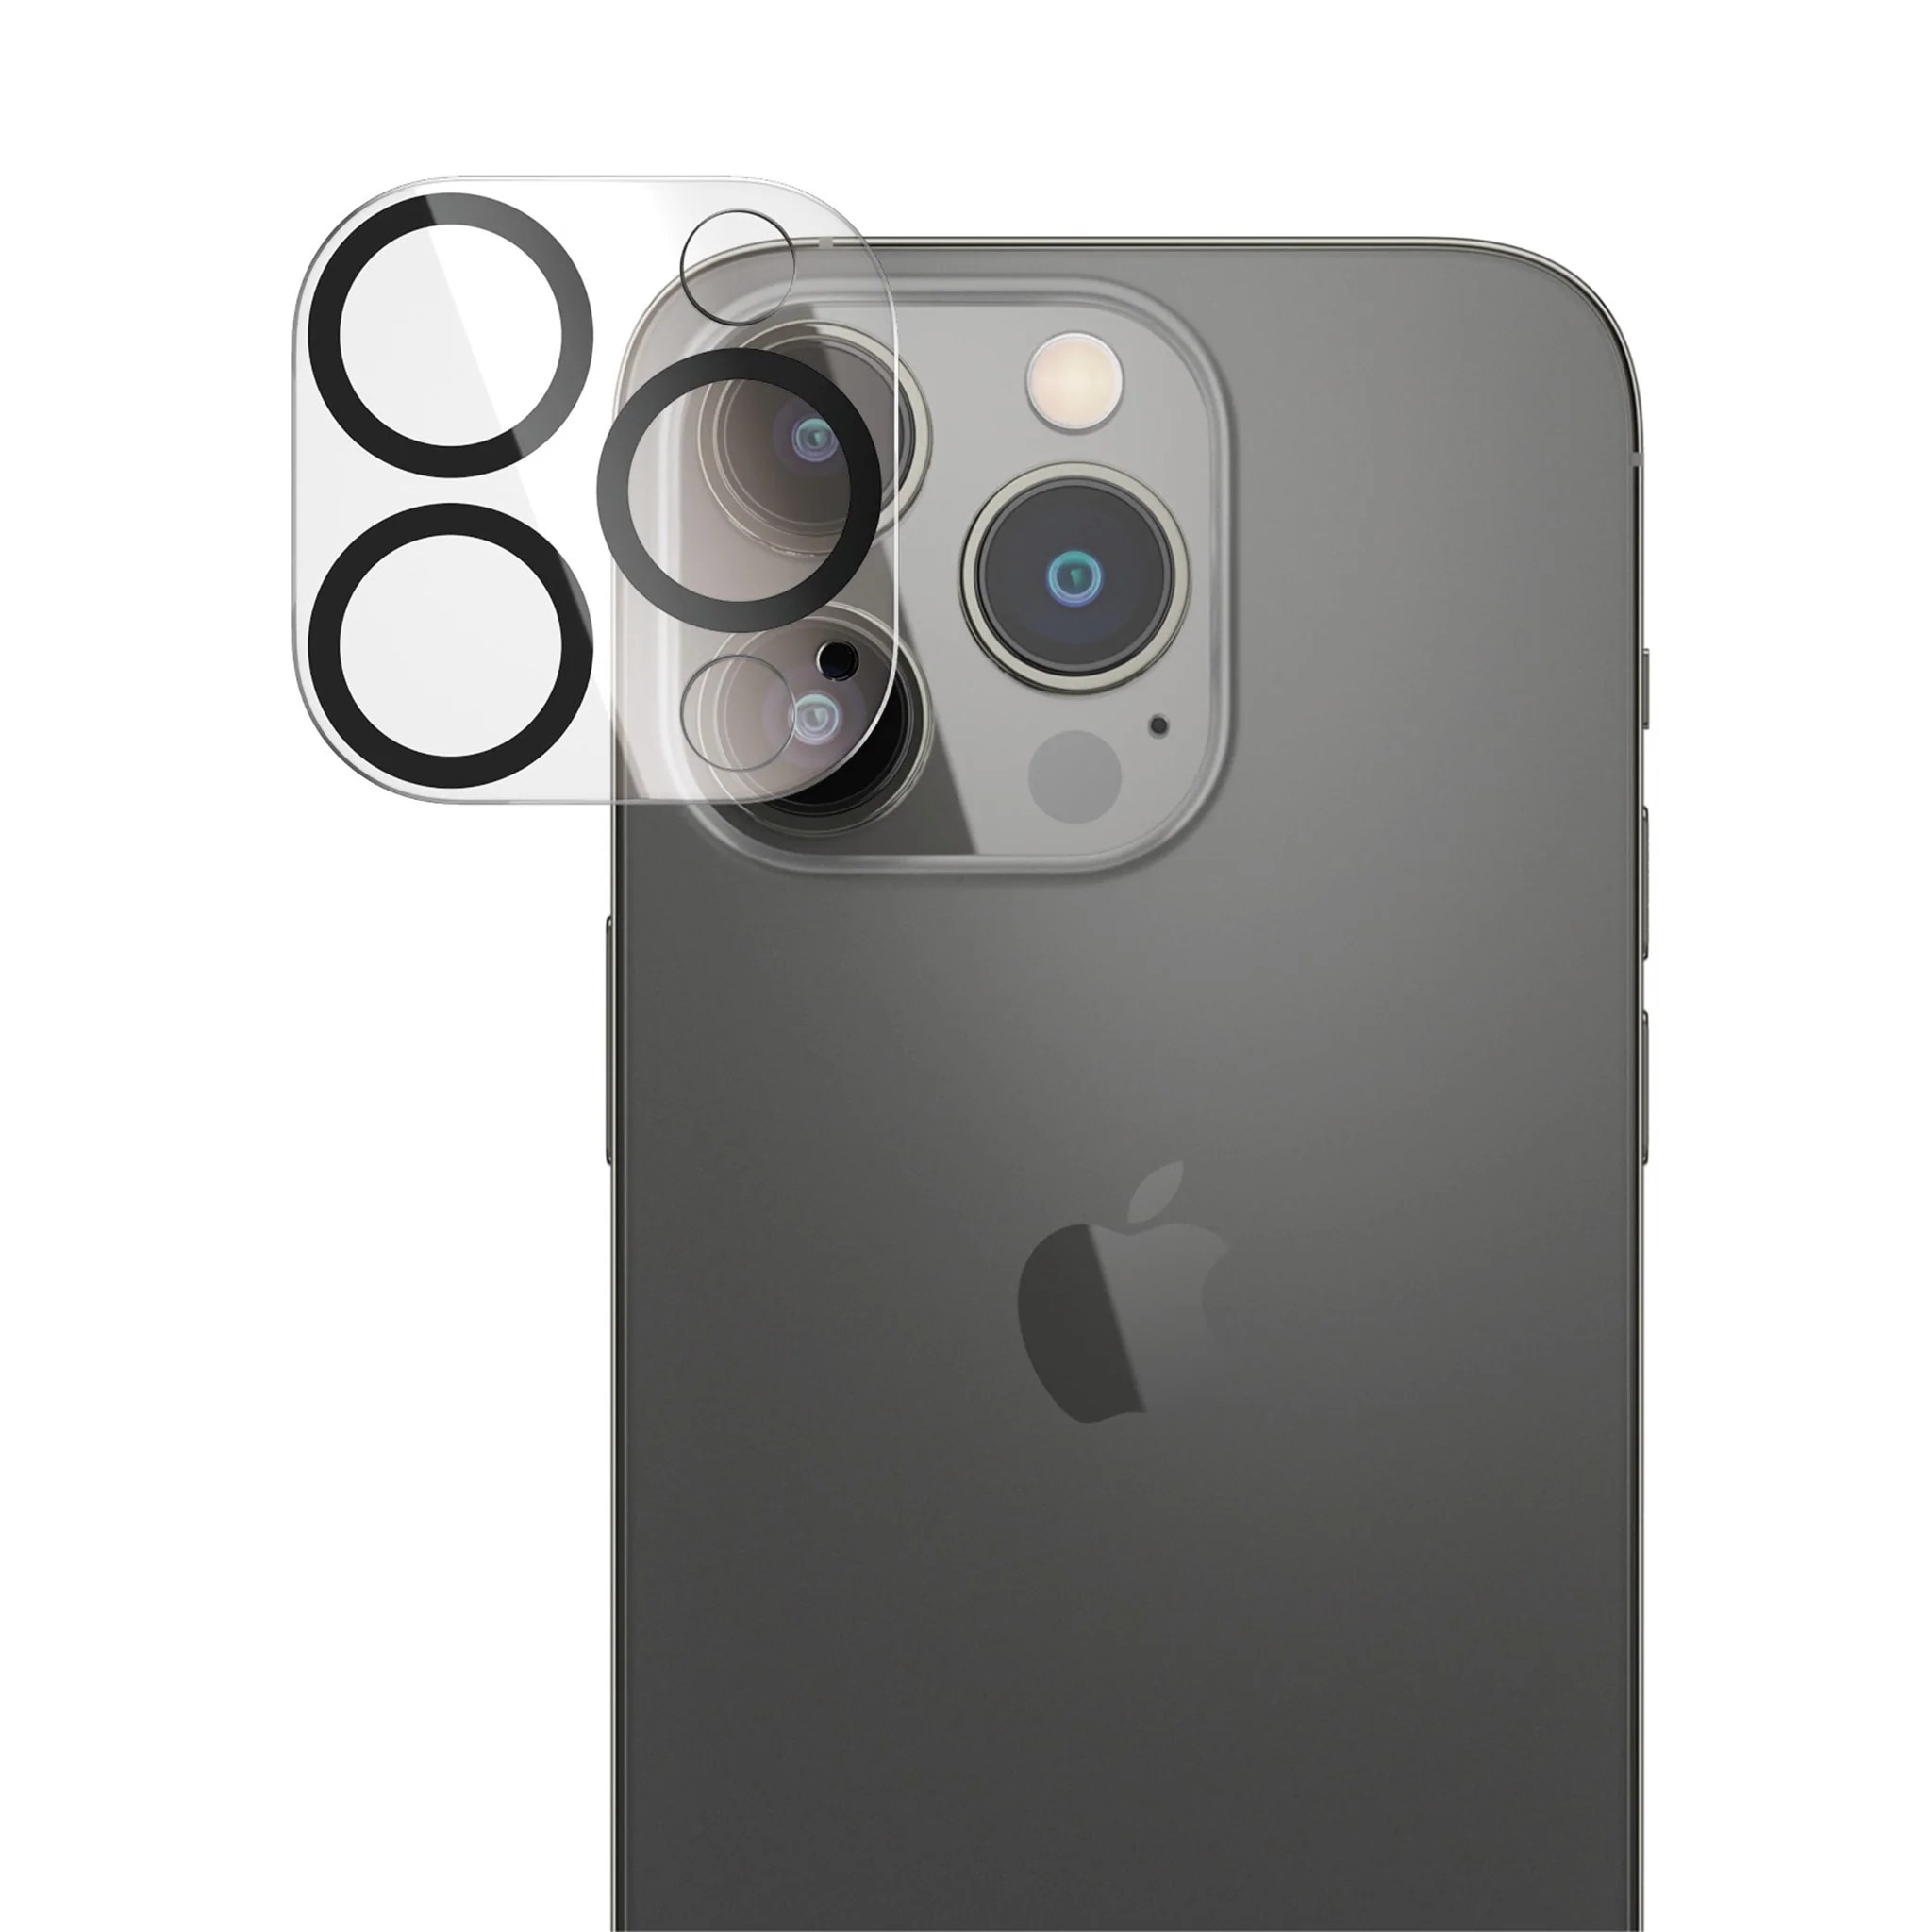 iPhone 14 Pro Max Camera Lens Protector PicturePerfect